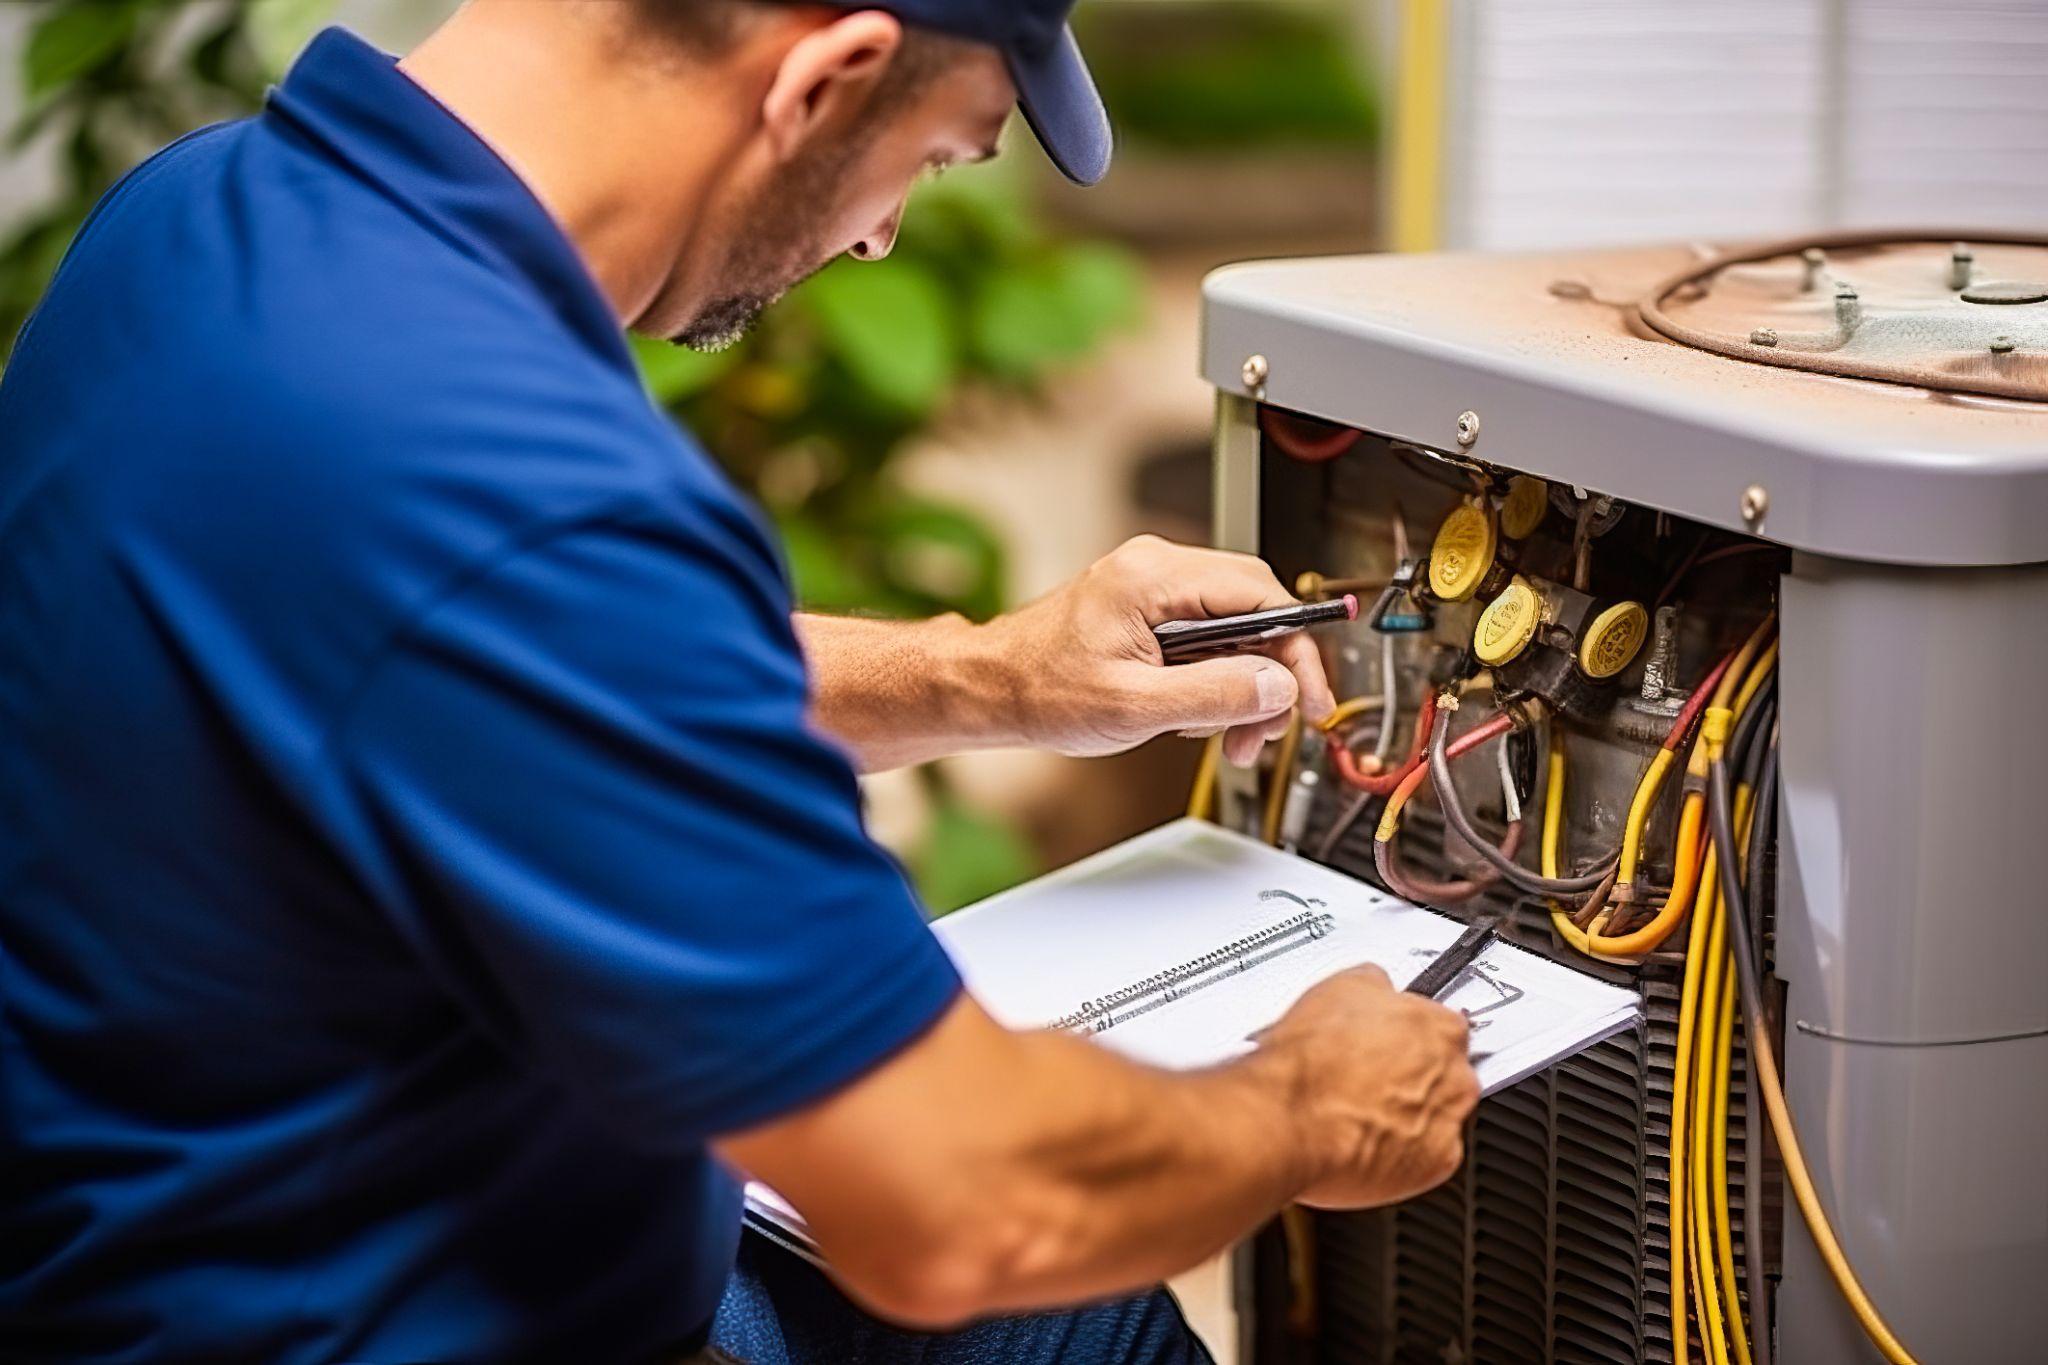 Efficient HVAC technician thoroughly inspecting a home air conditioning unit, holding clipboard in cool color indoor setting.